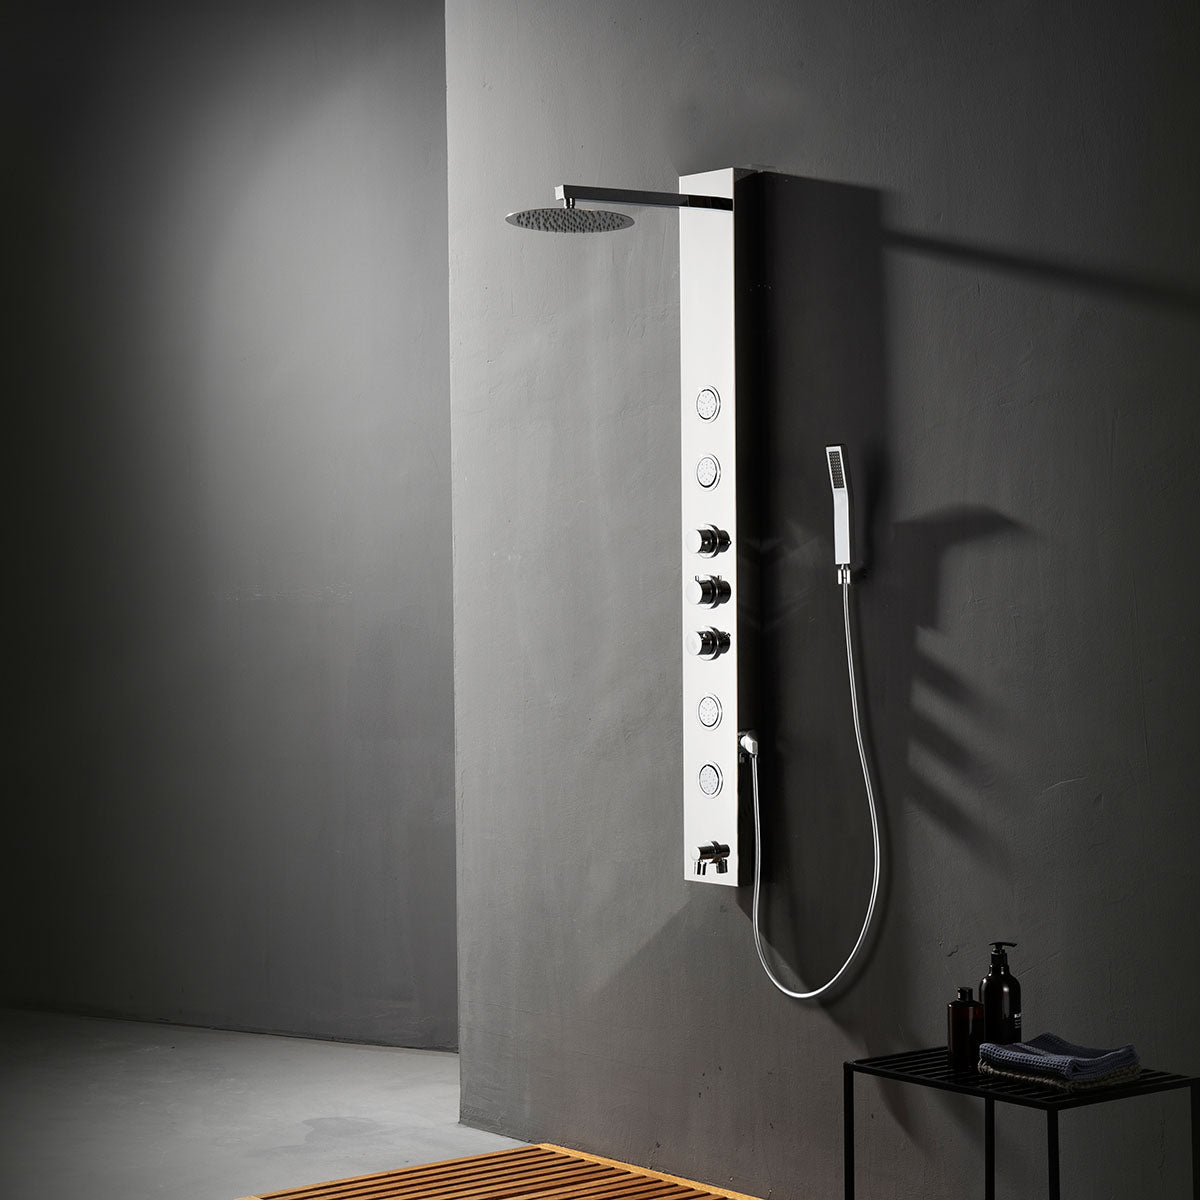 SP-5654C Stainless Steel Shower Panel (Chrome) - iStyle Bath